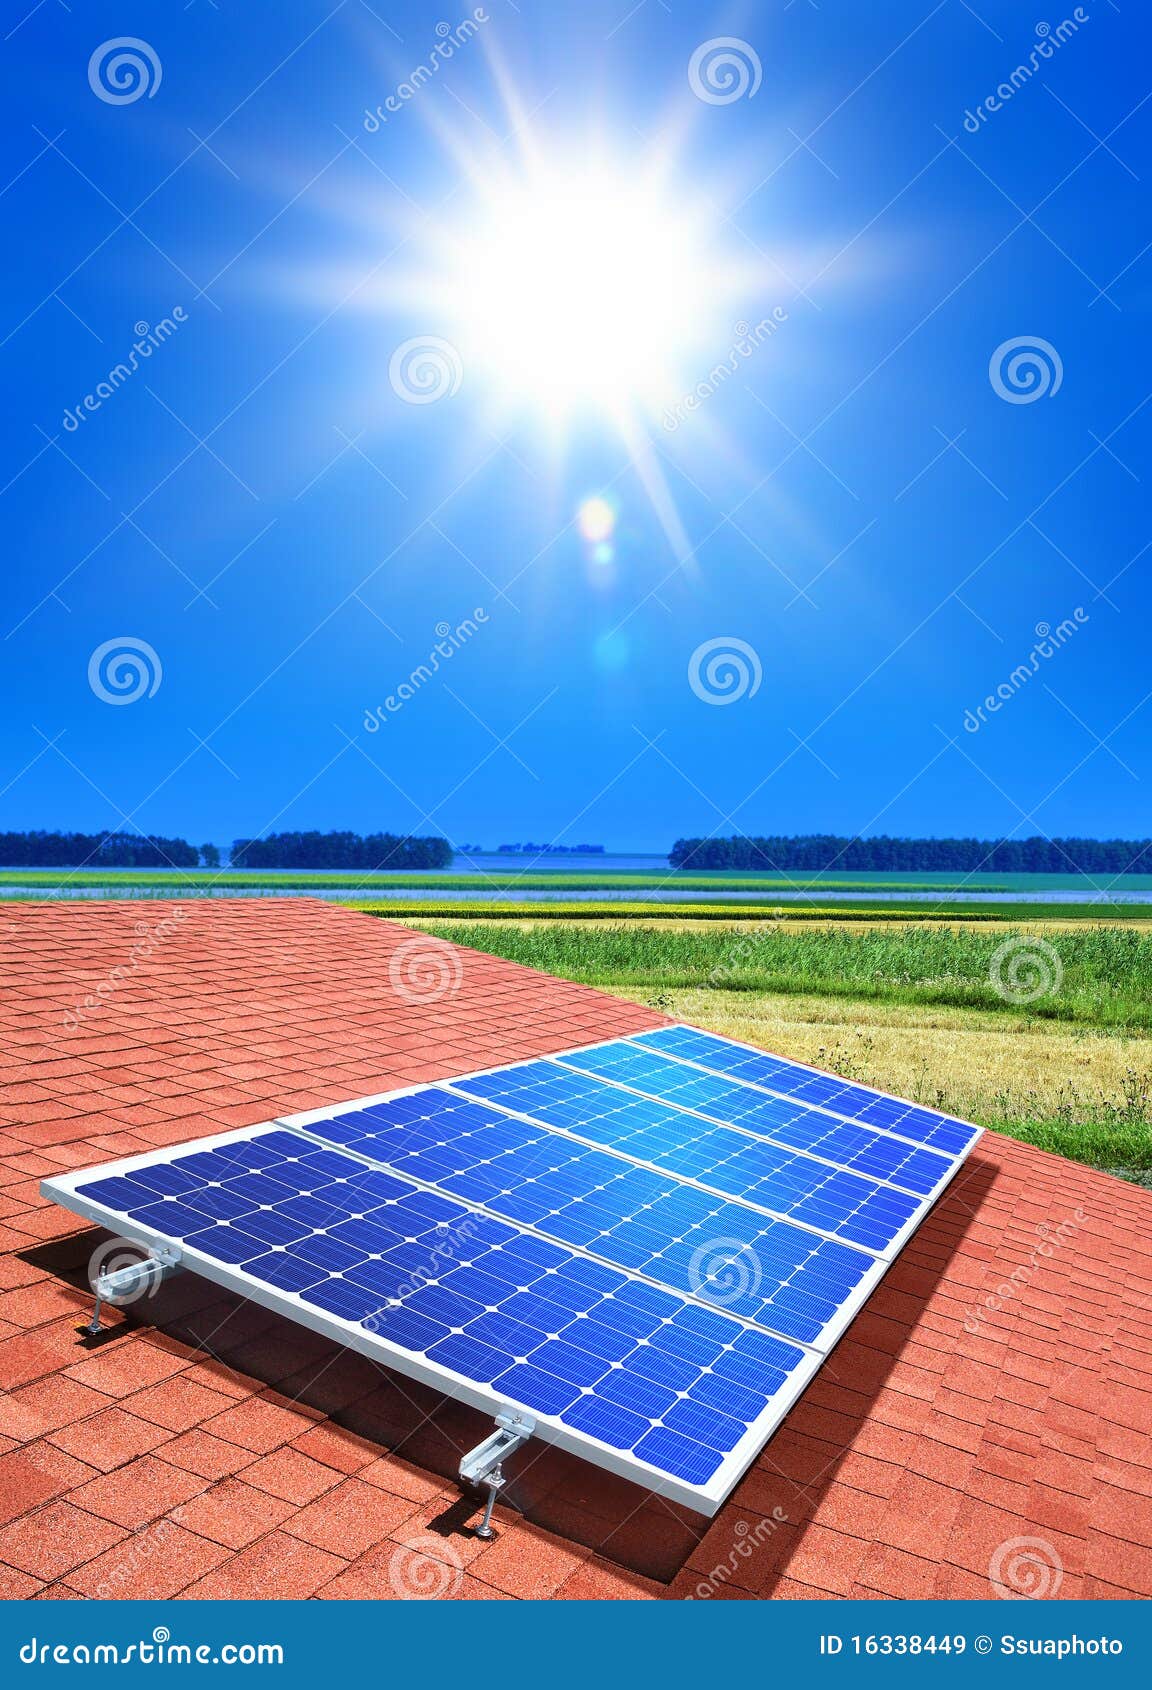 solar-cell array on roof